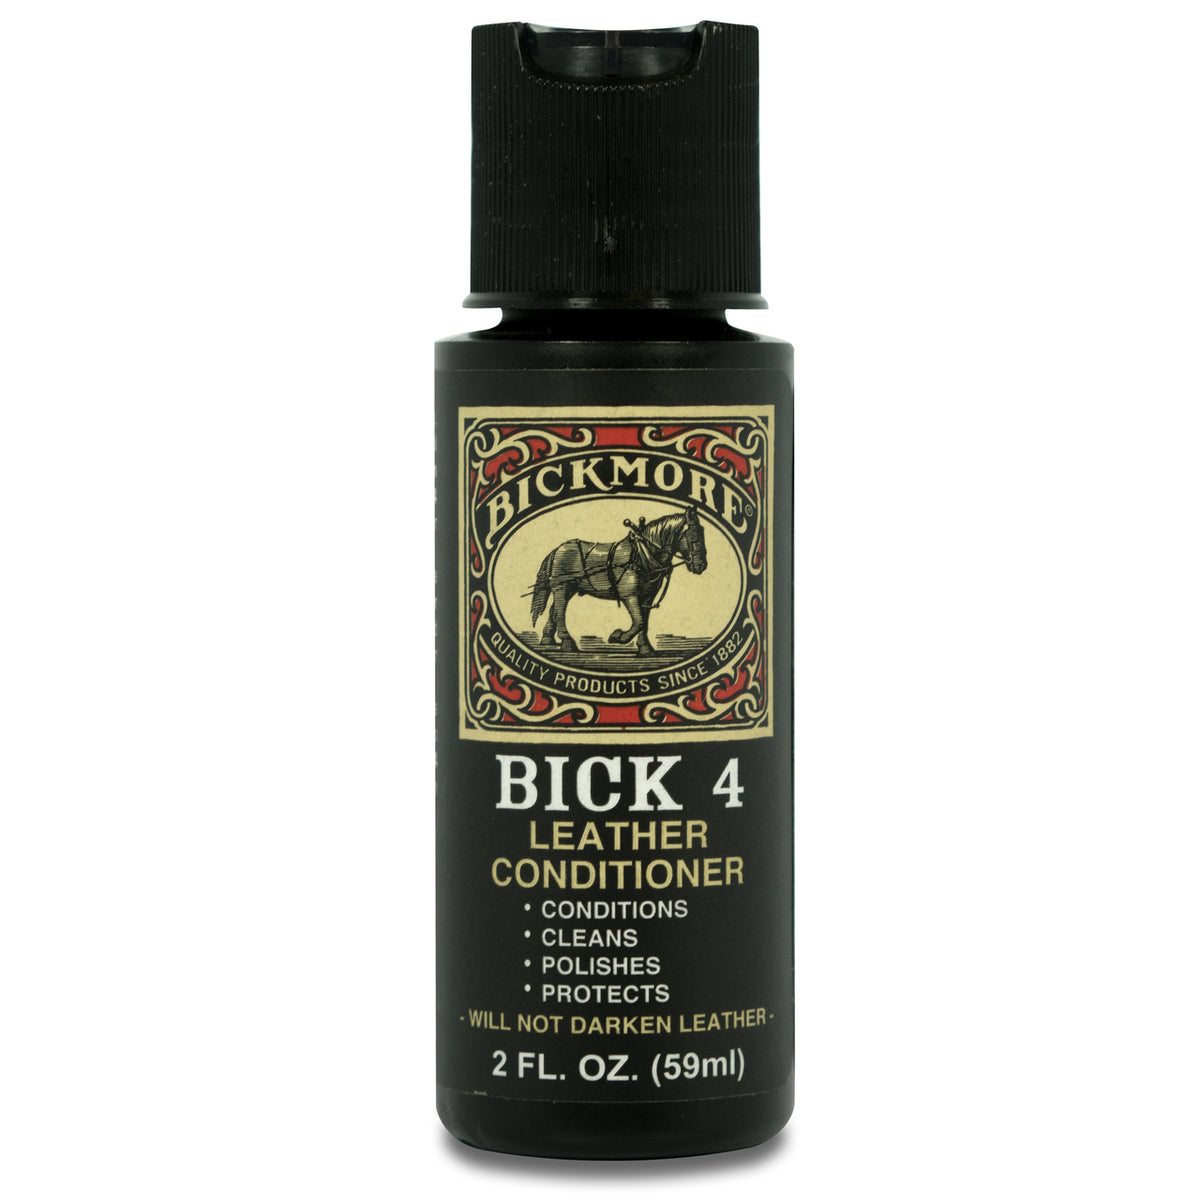 Bickmore Leather Conditioner (BICK4) - OUR FAVORITE!